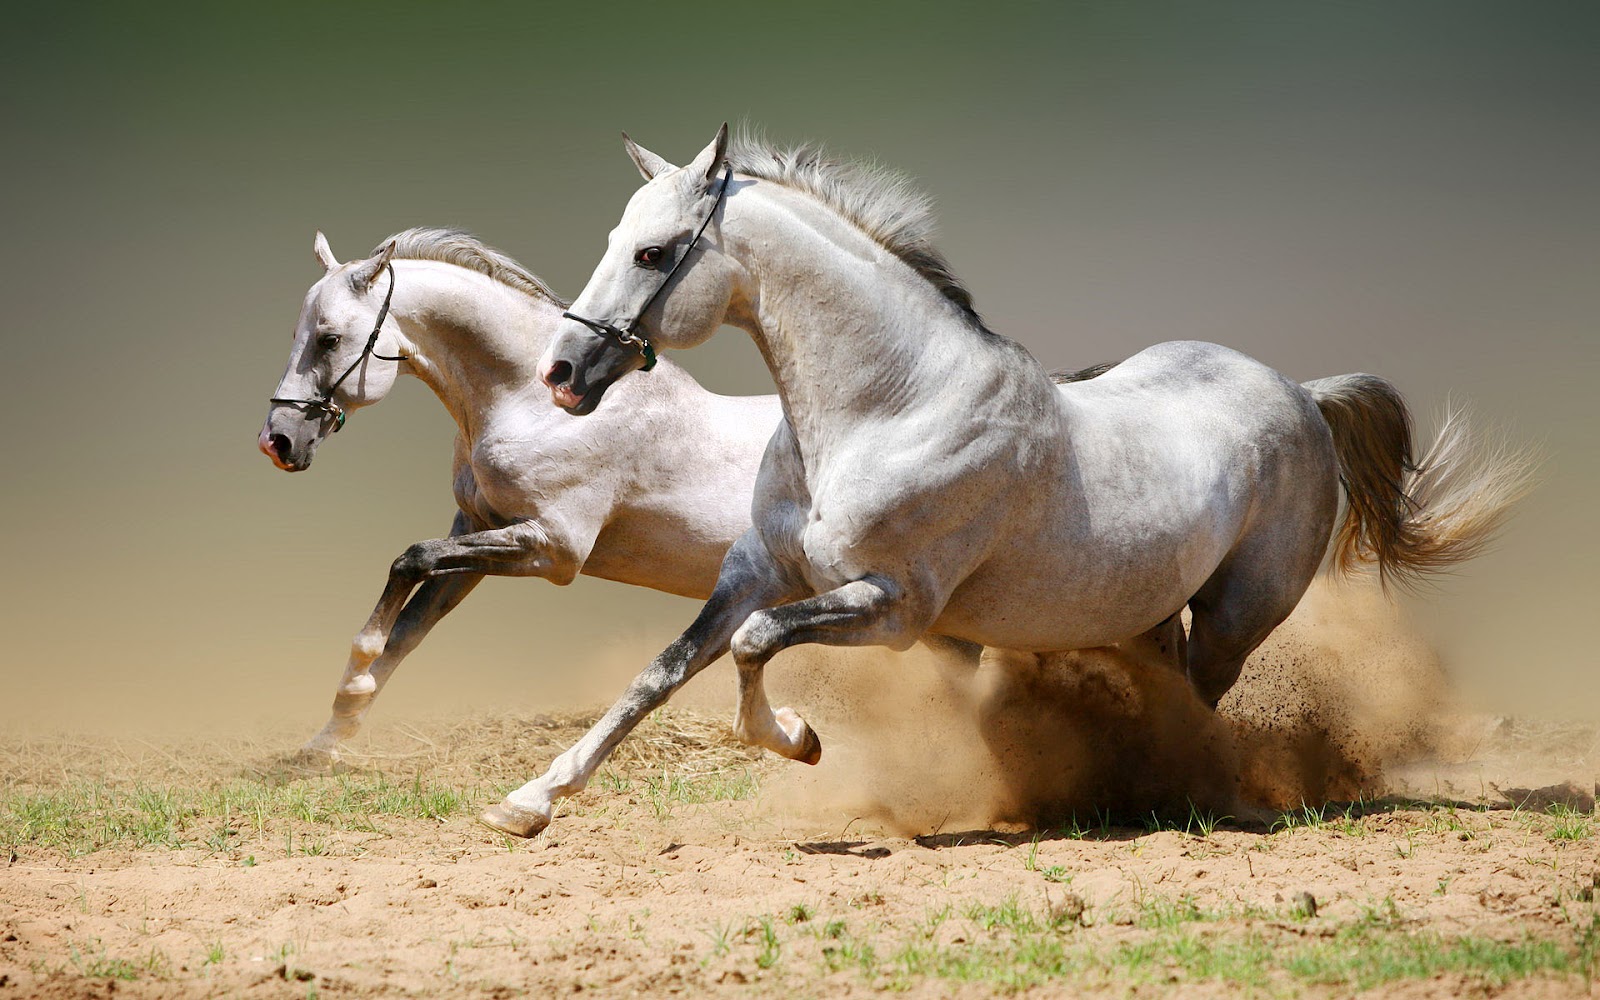 HD animal wallpaper with white horses running fast Horse wallpaper 1600x1000